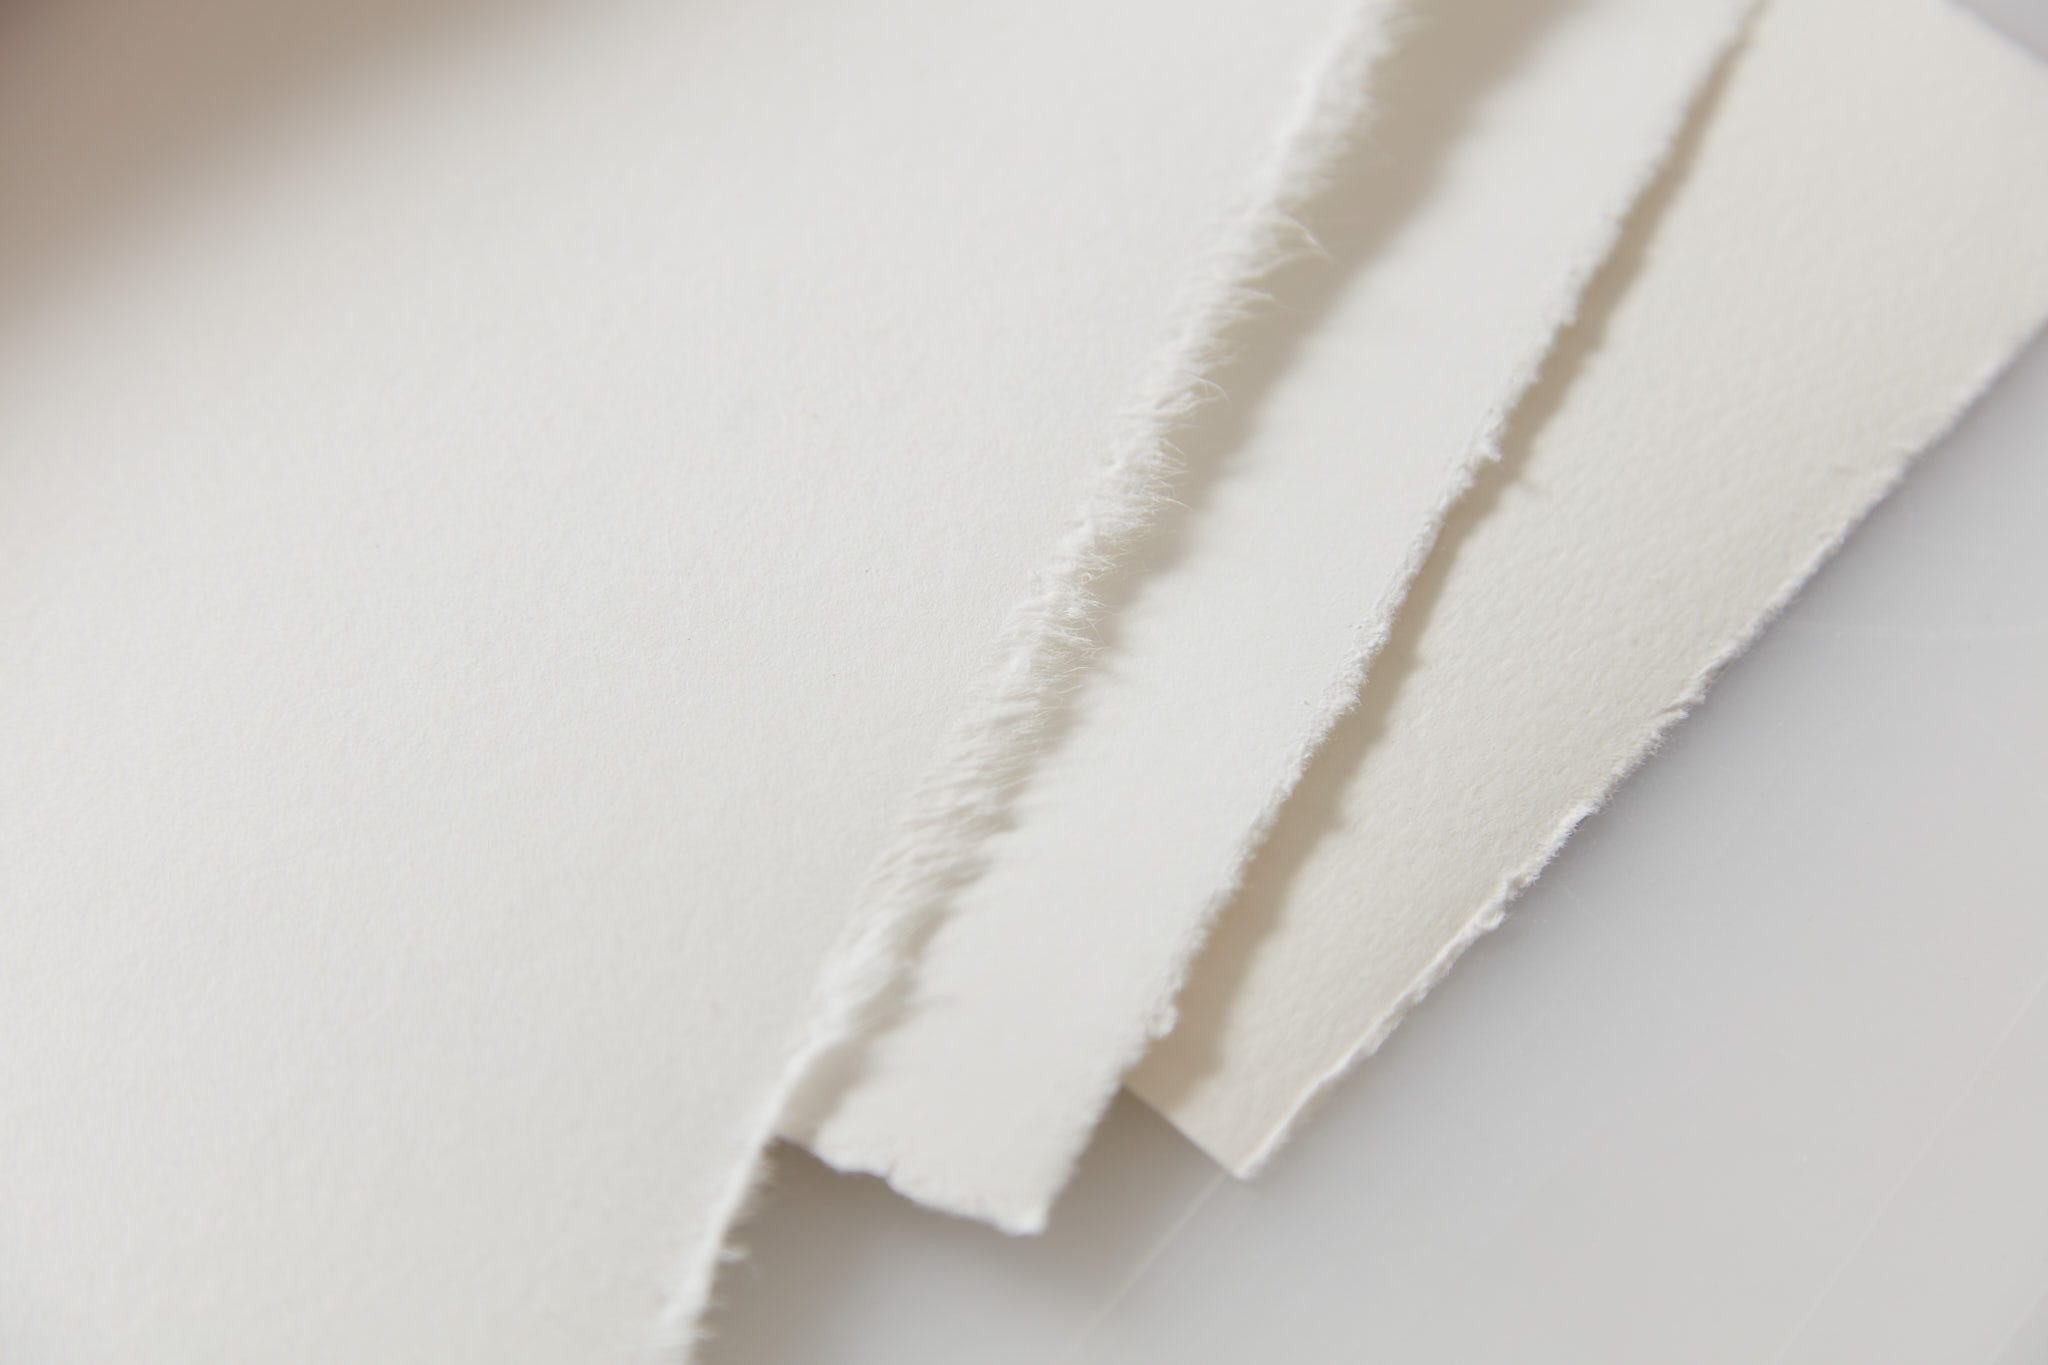 Deckle Edged Paper: A Beginner's Guide